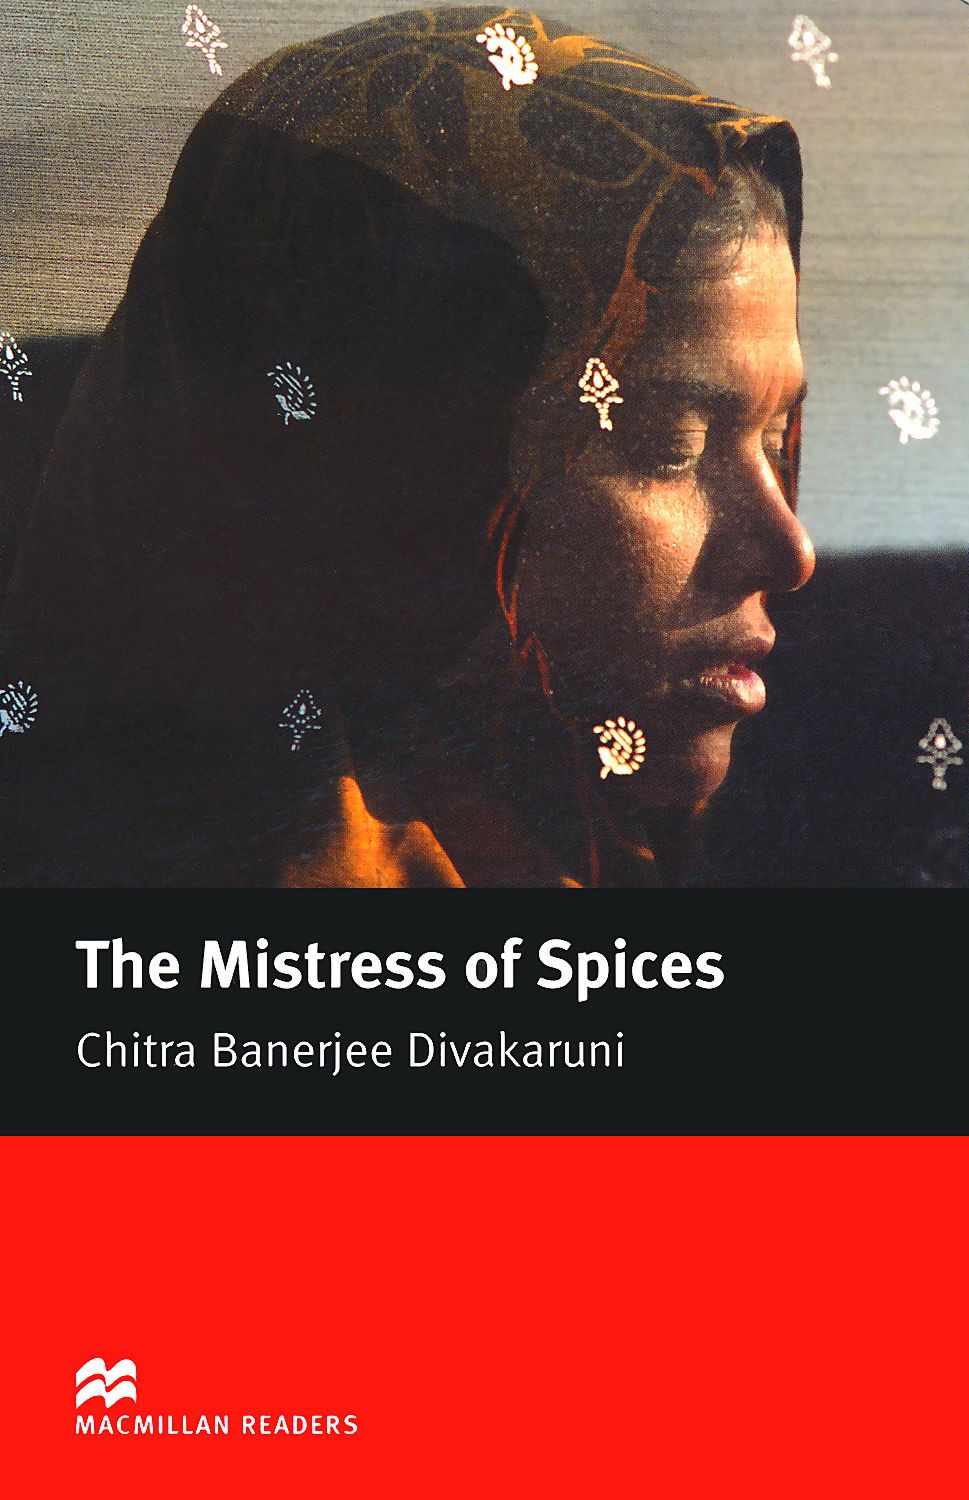 the mistress of spices by chitra banerjee divakaruni